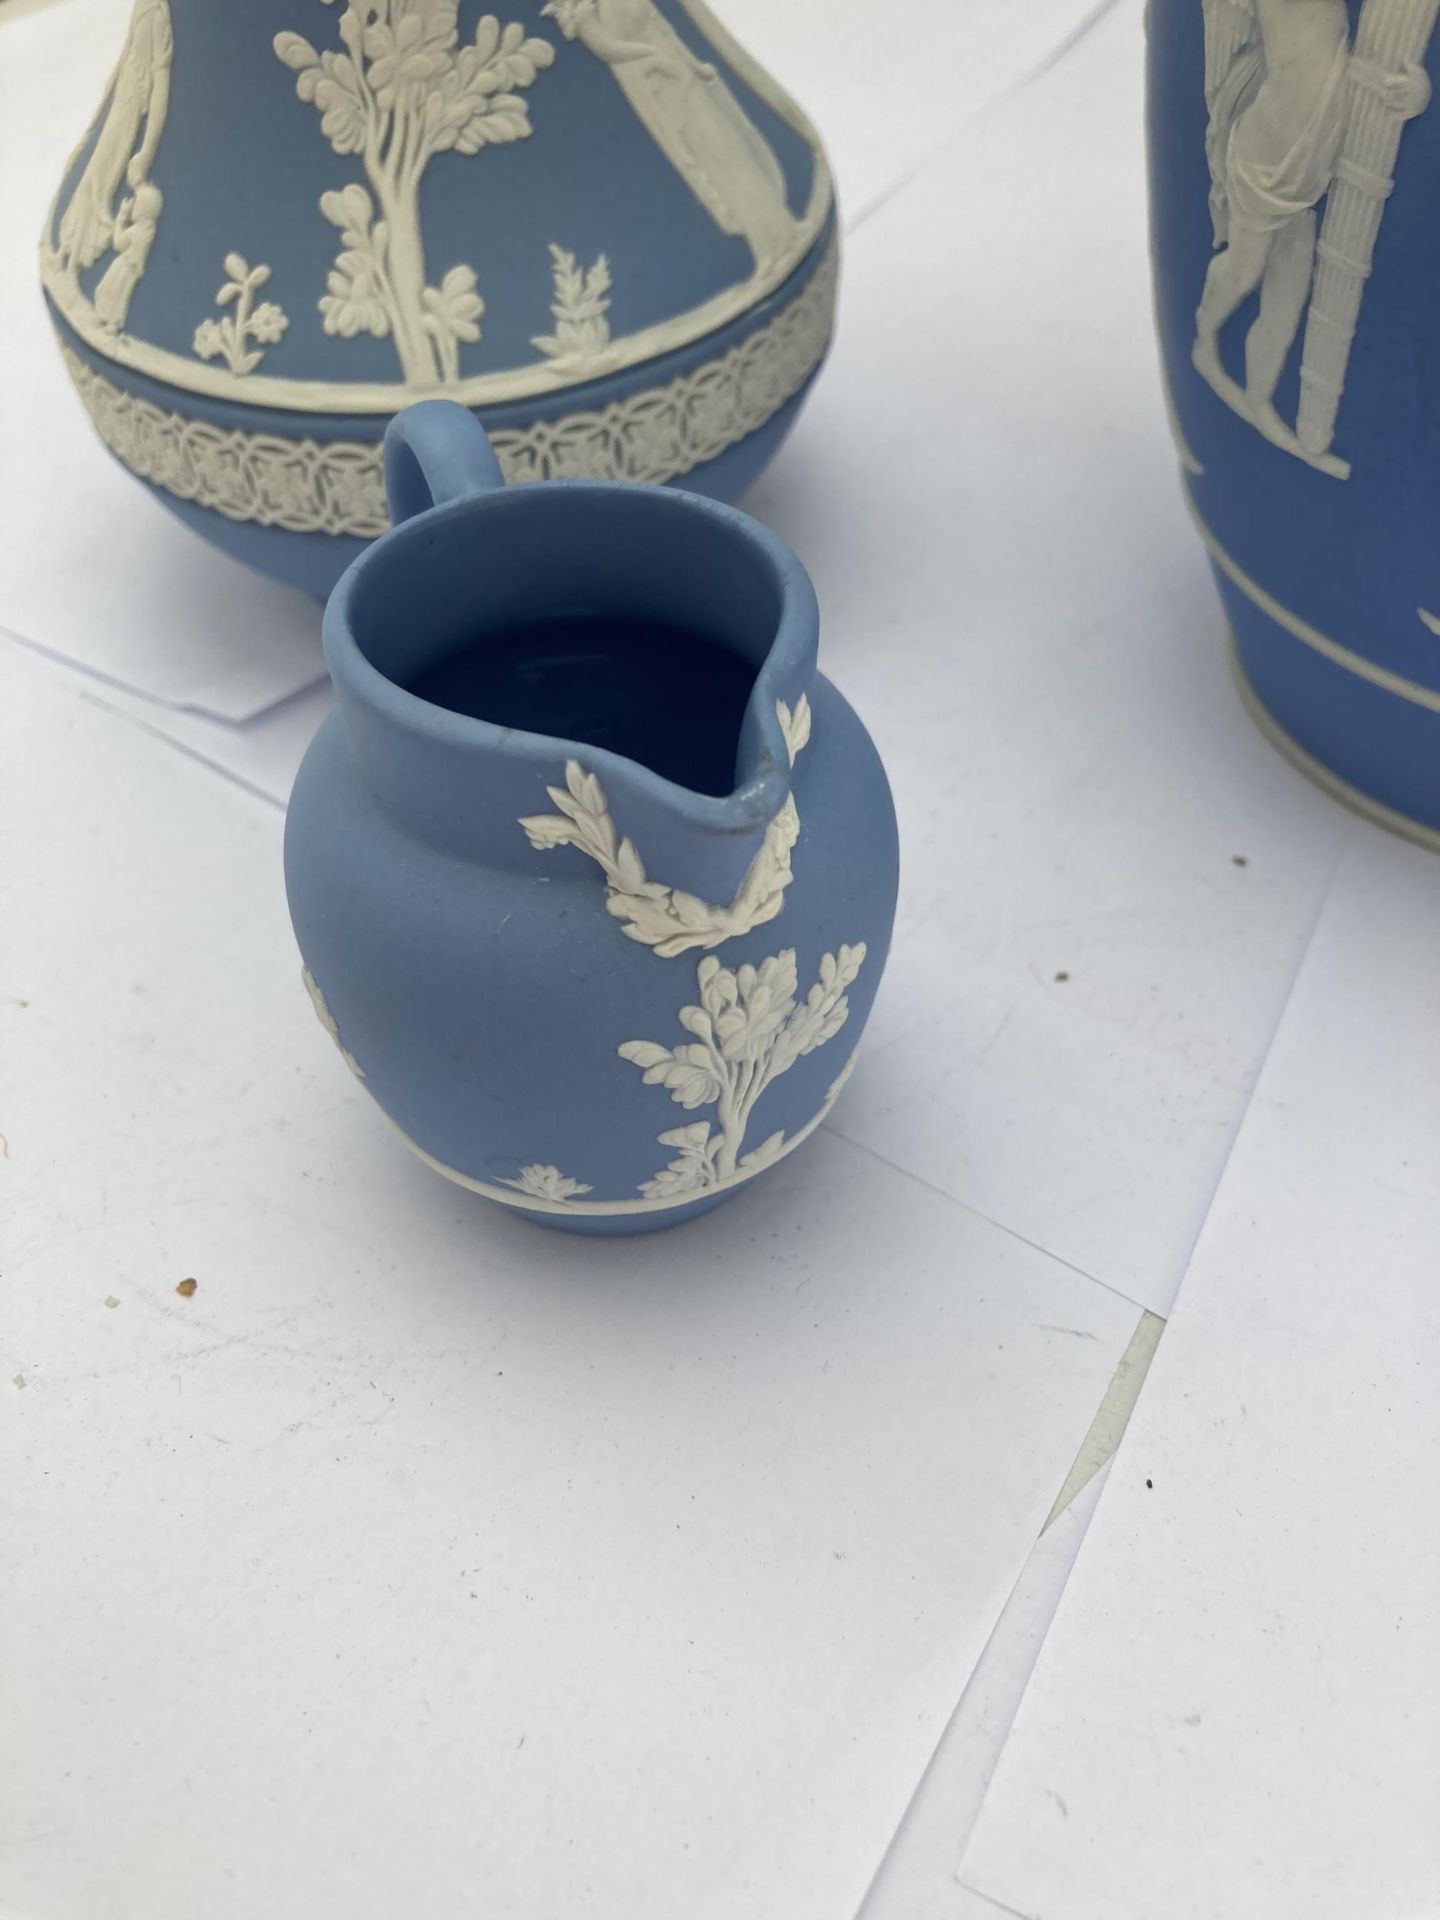 A GROUP OF THREE JASPERWARE ITEMS - TWO WEDGWOOD JUGS AND FURTHER JUG - Image 4 of 4